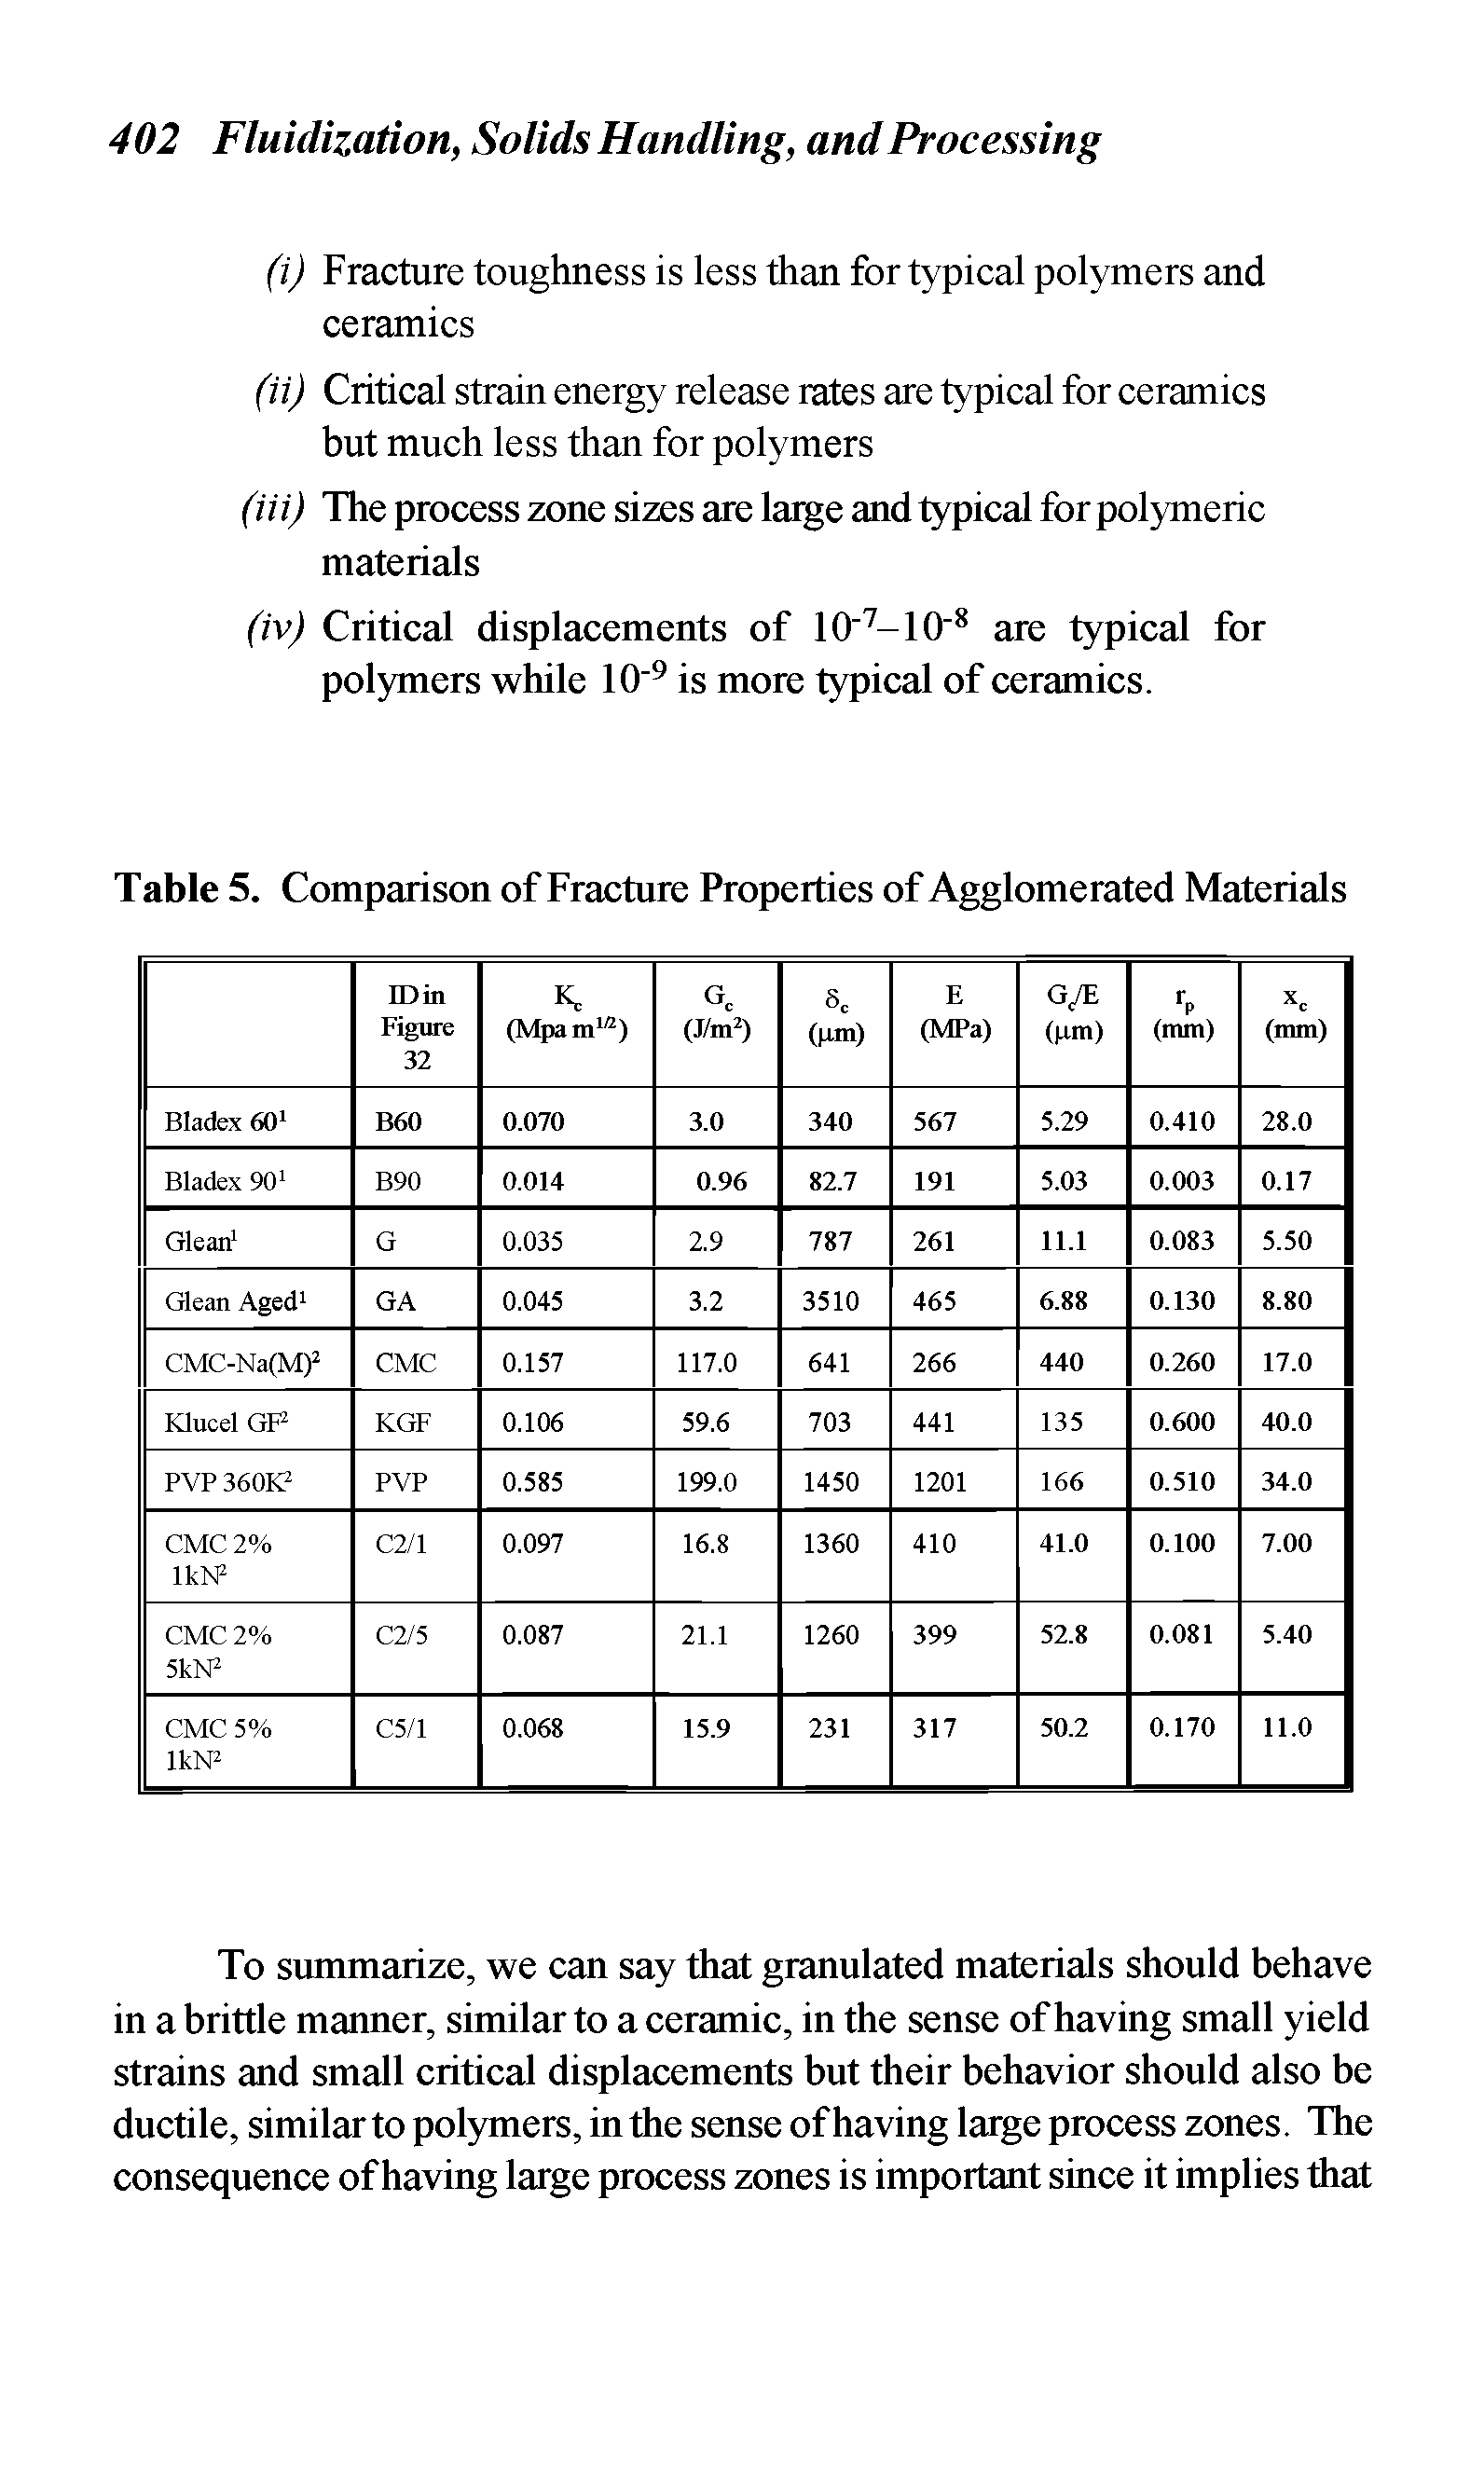 Table 5. Comparison of Fracture Properties of Agglomerated Materials...